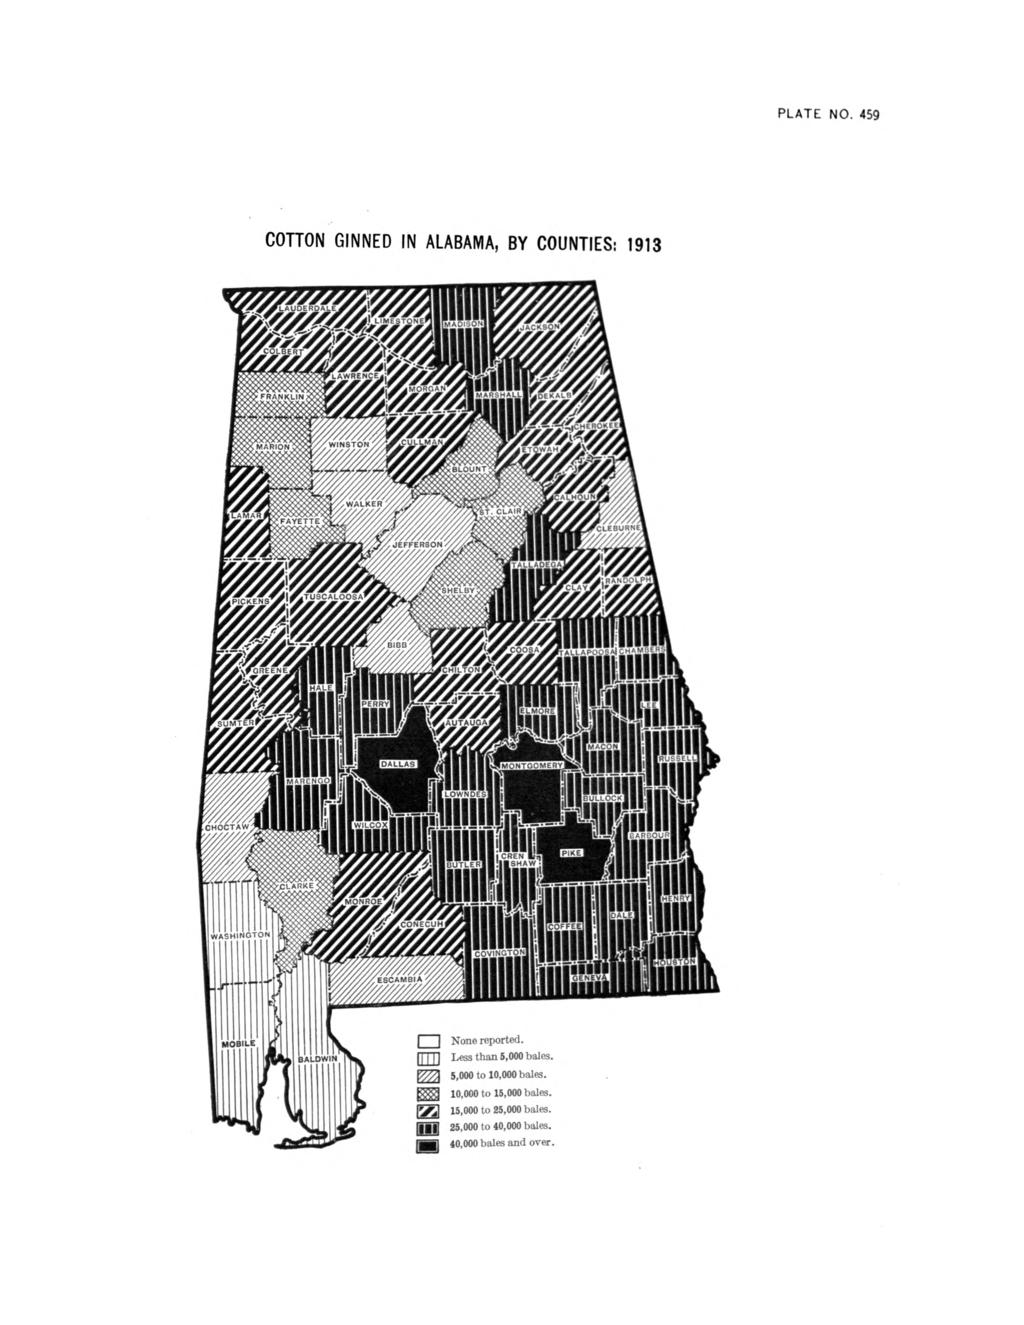 PLATE NO. 459 COTTON GINNED IN ALABAMA, BY COUNTIES: 1913 Nono reported. ] Less than 5,000 bales. 5.000 to 10,000 bales.